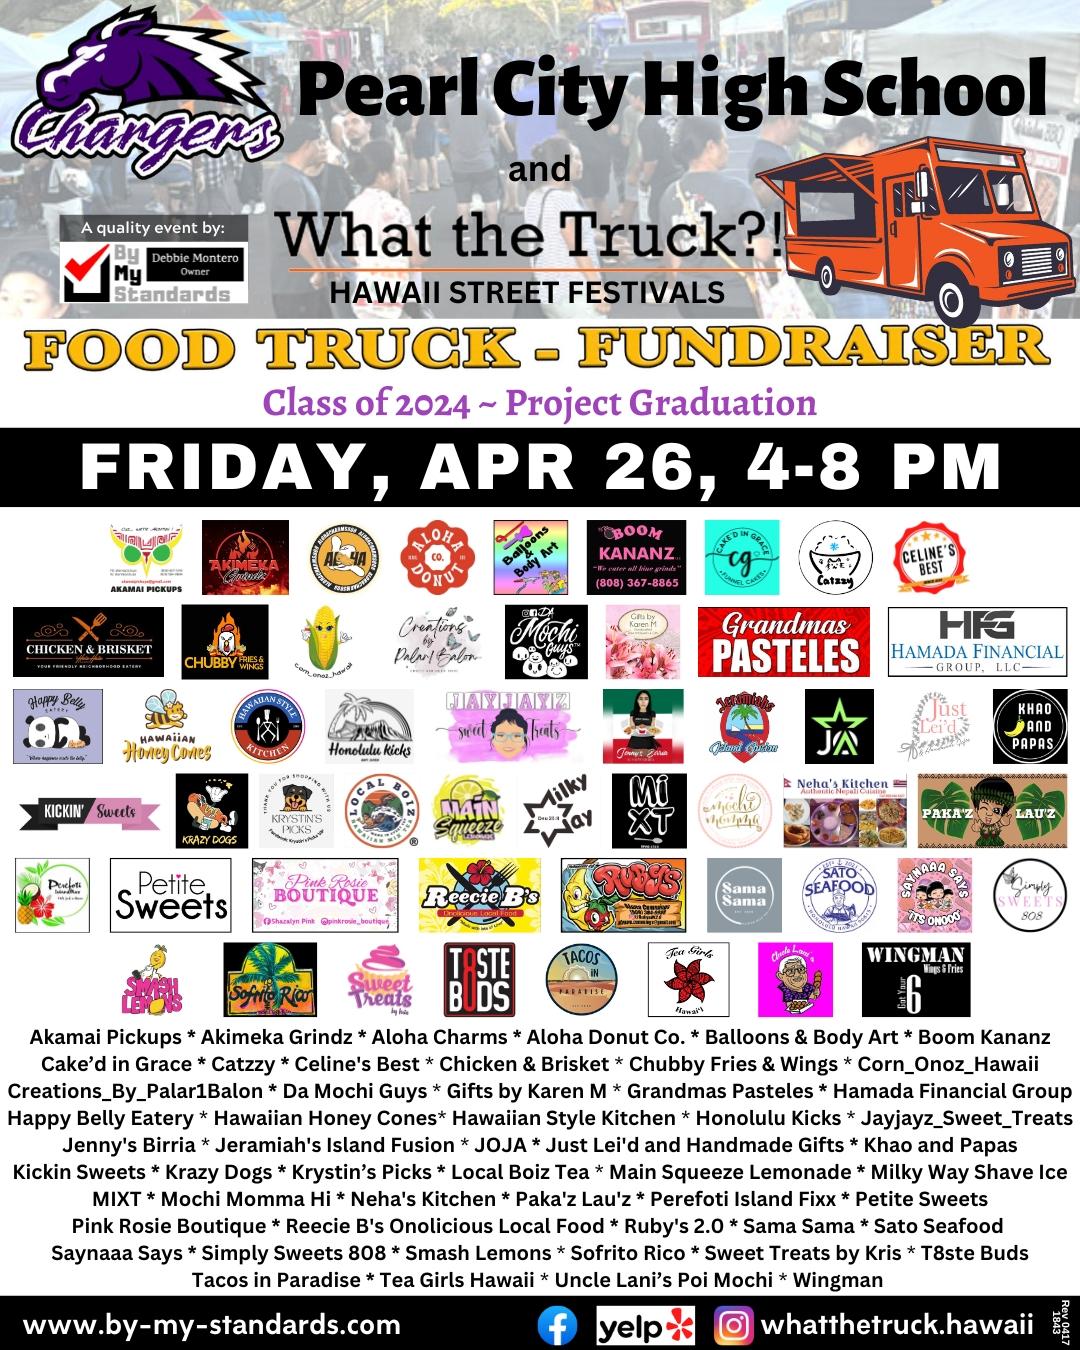 Pearl City High School What the Truck?! Food truck fundraiser 04/26 at 4-8 pm. Get more info at by-my-standards.com/